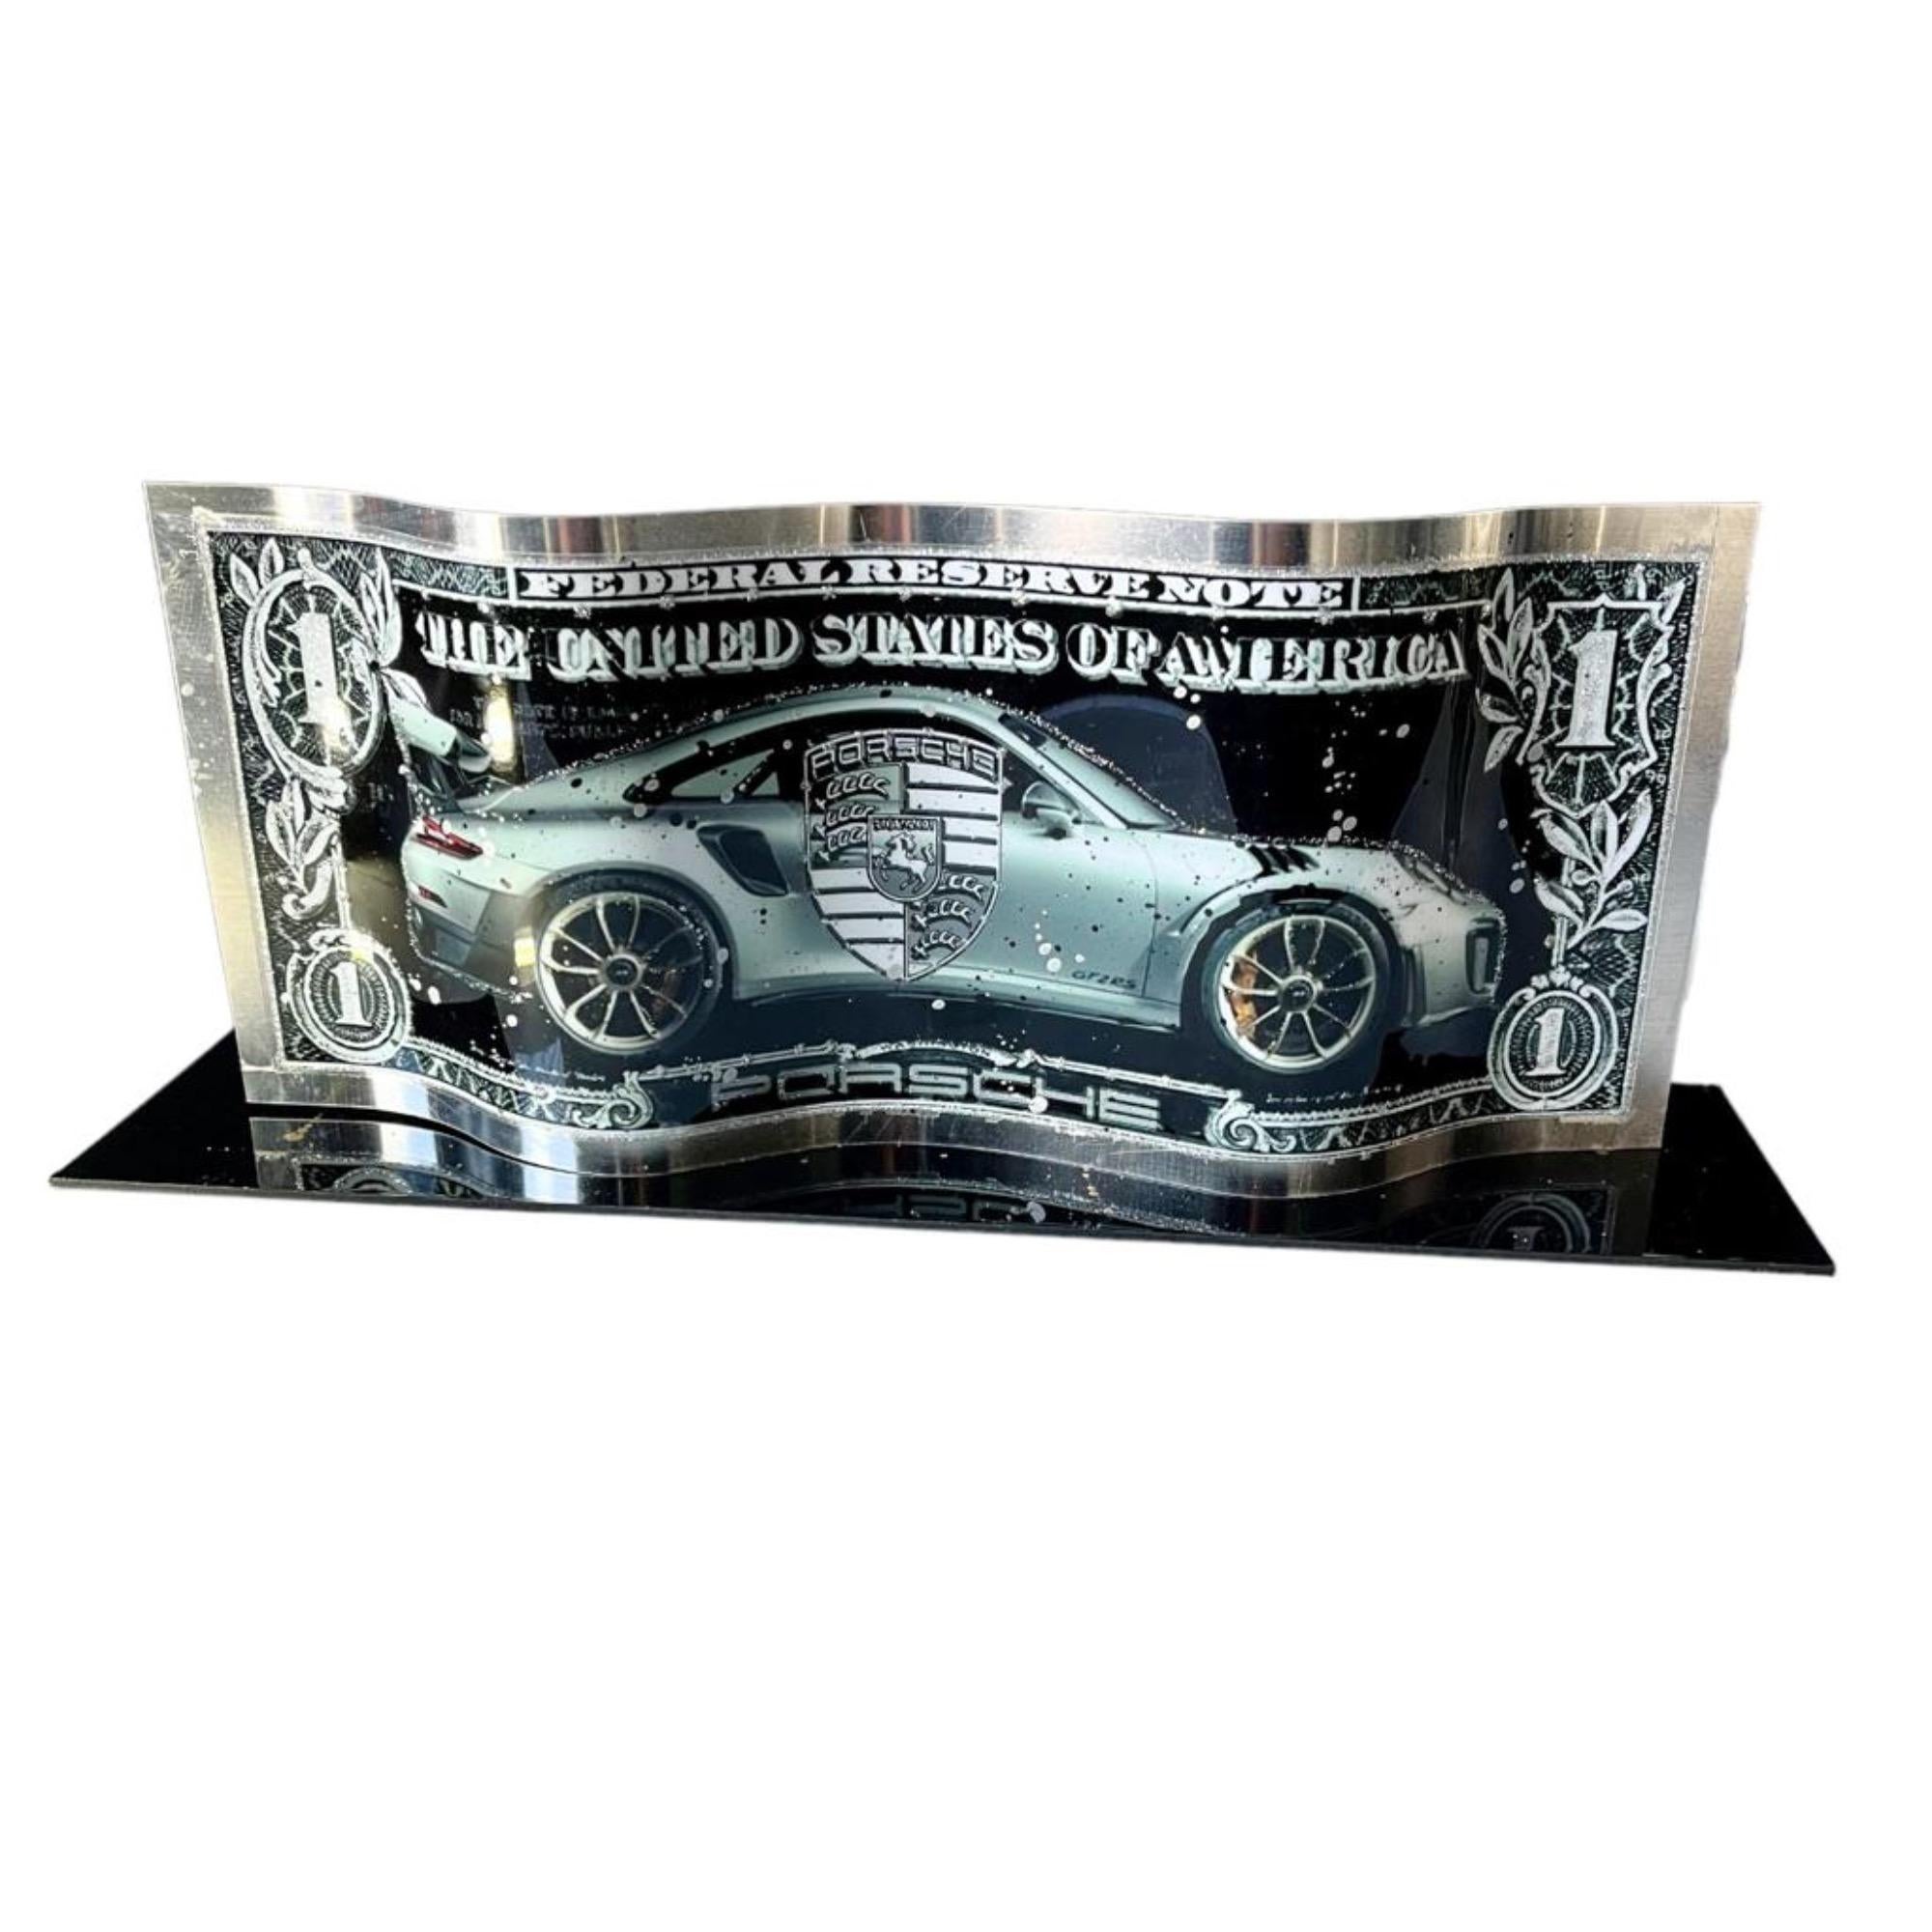 ALAIN MIMOUNI - Dollar Bills Collections- Ask for model - Sculpture by Alain mimouni